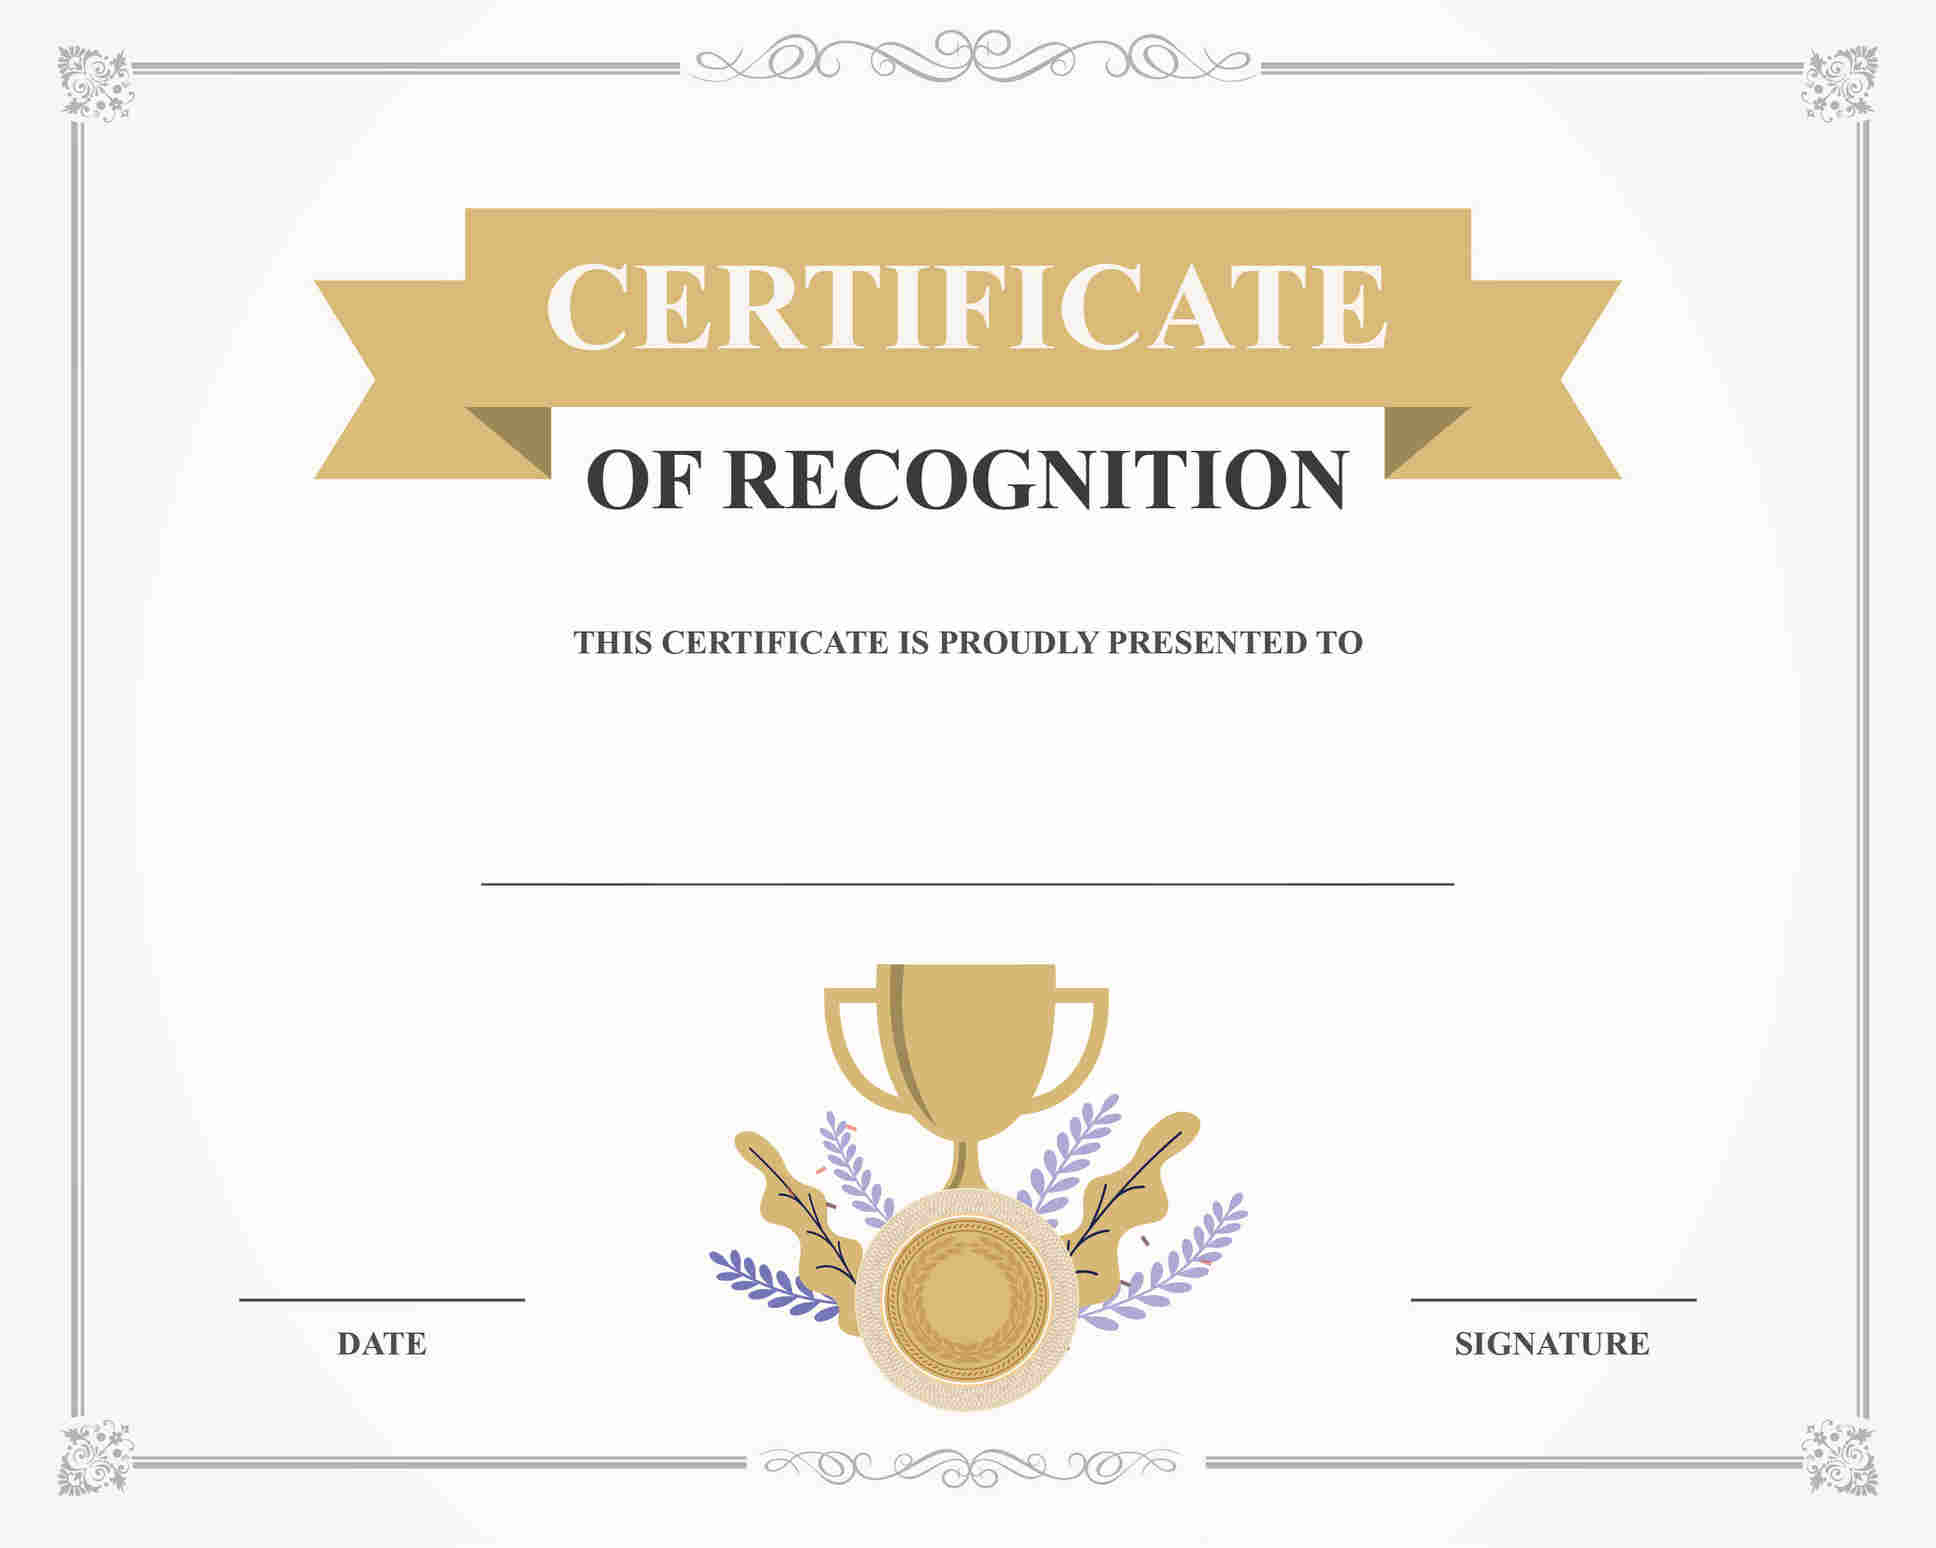 10 Amazing Award Certificate Templates In 2021 - Recognize regarding Contest Winner Certificate Template